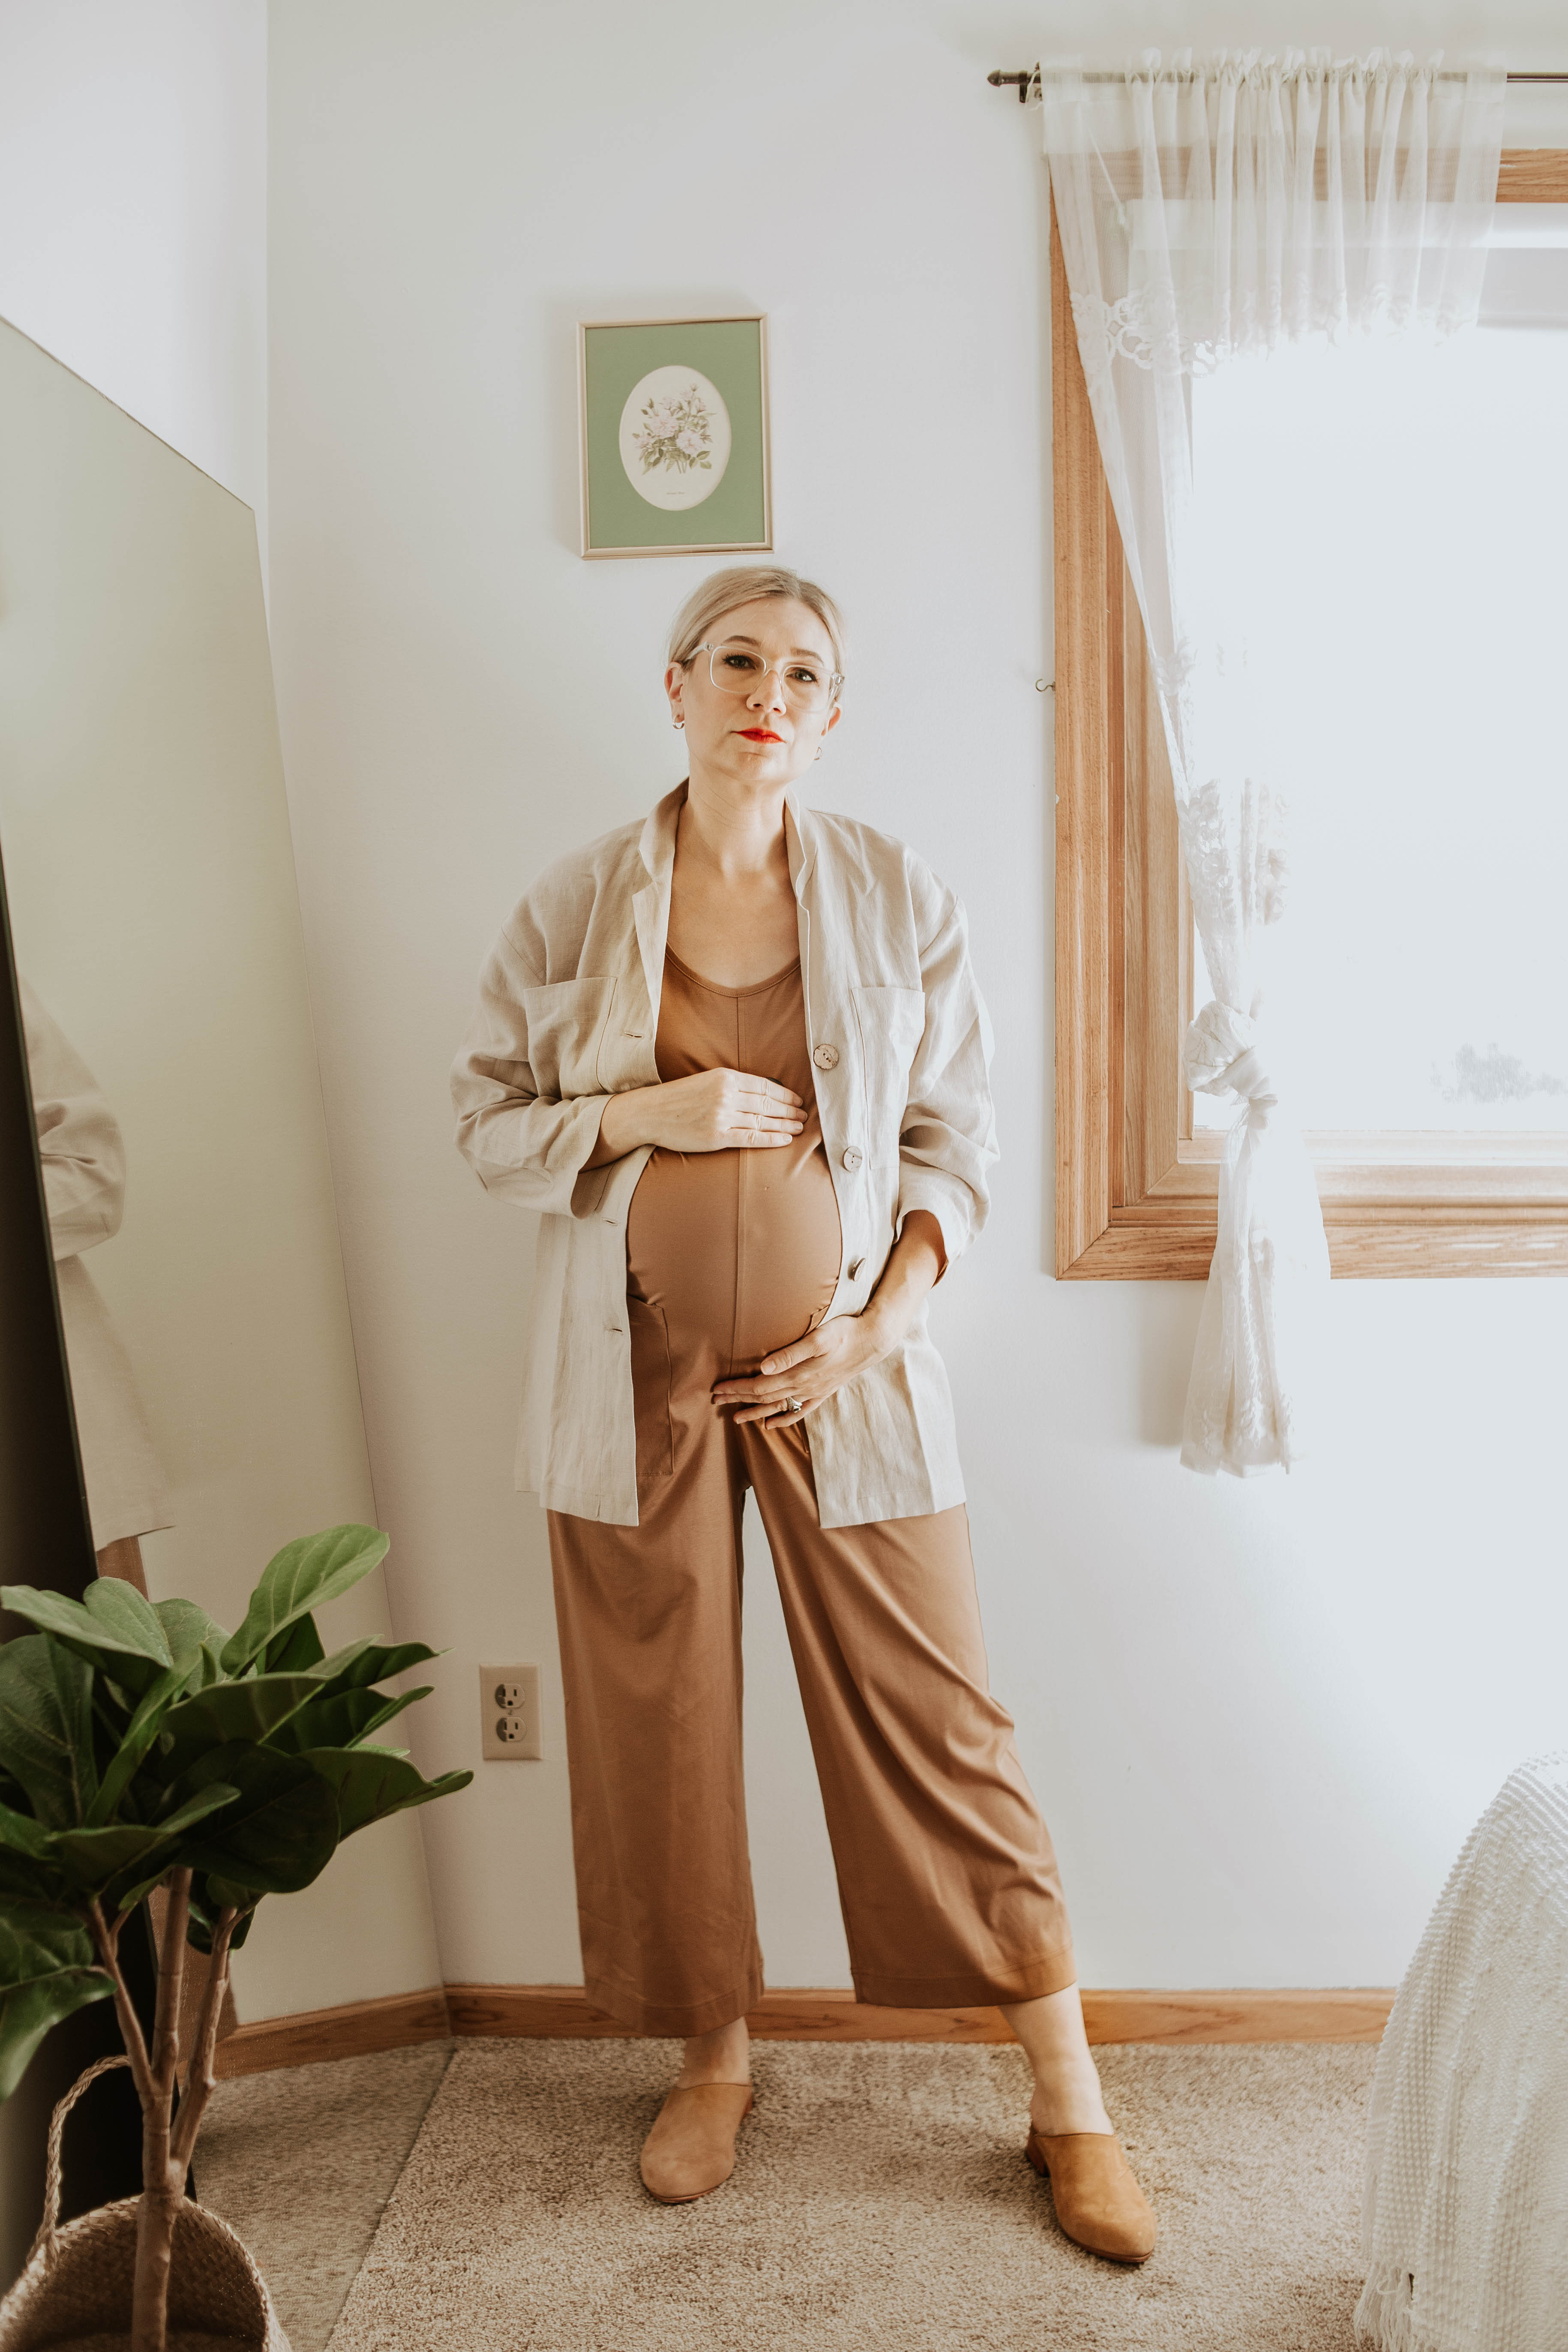 Maternity Look Book Featuring Mostly Ethical Fashion